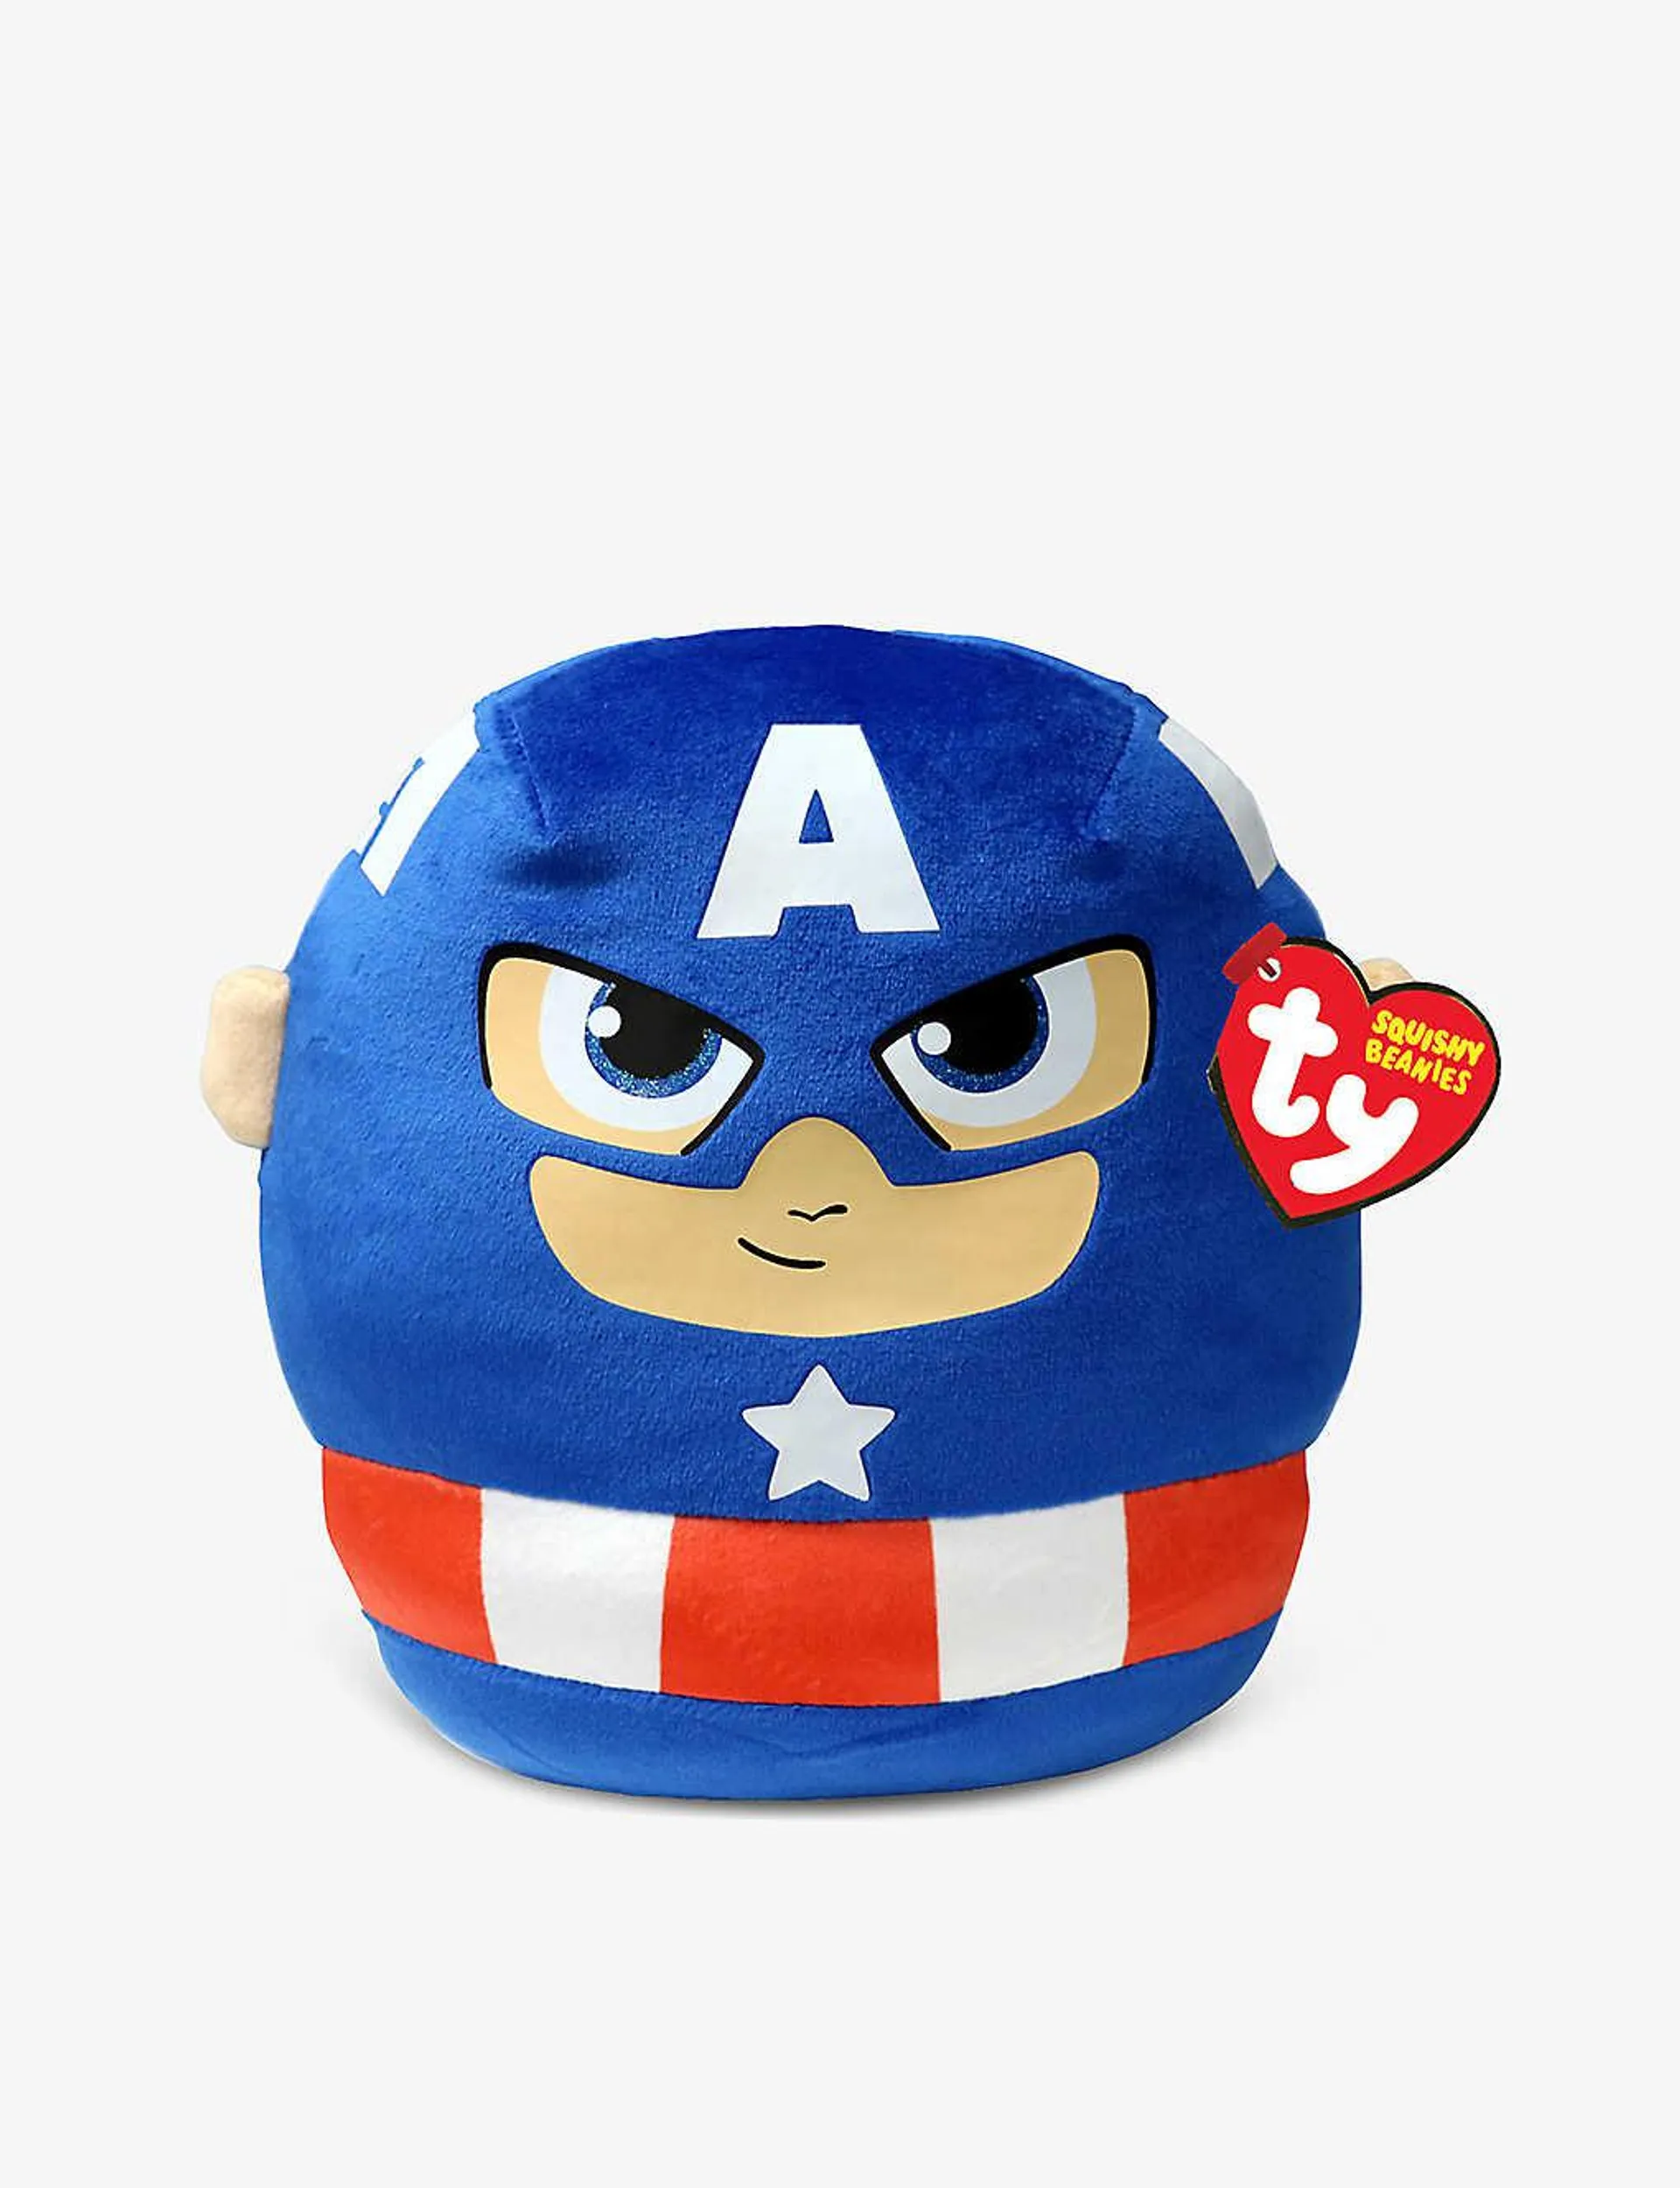 Captain America Squish-A-Boo soft toy 24cm